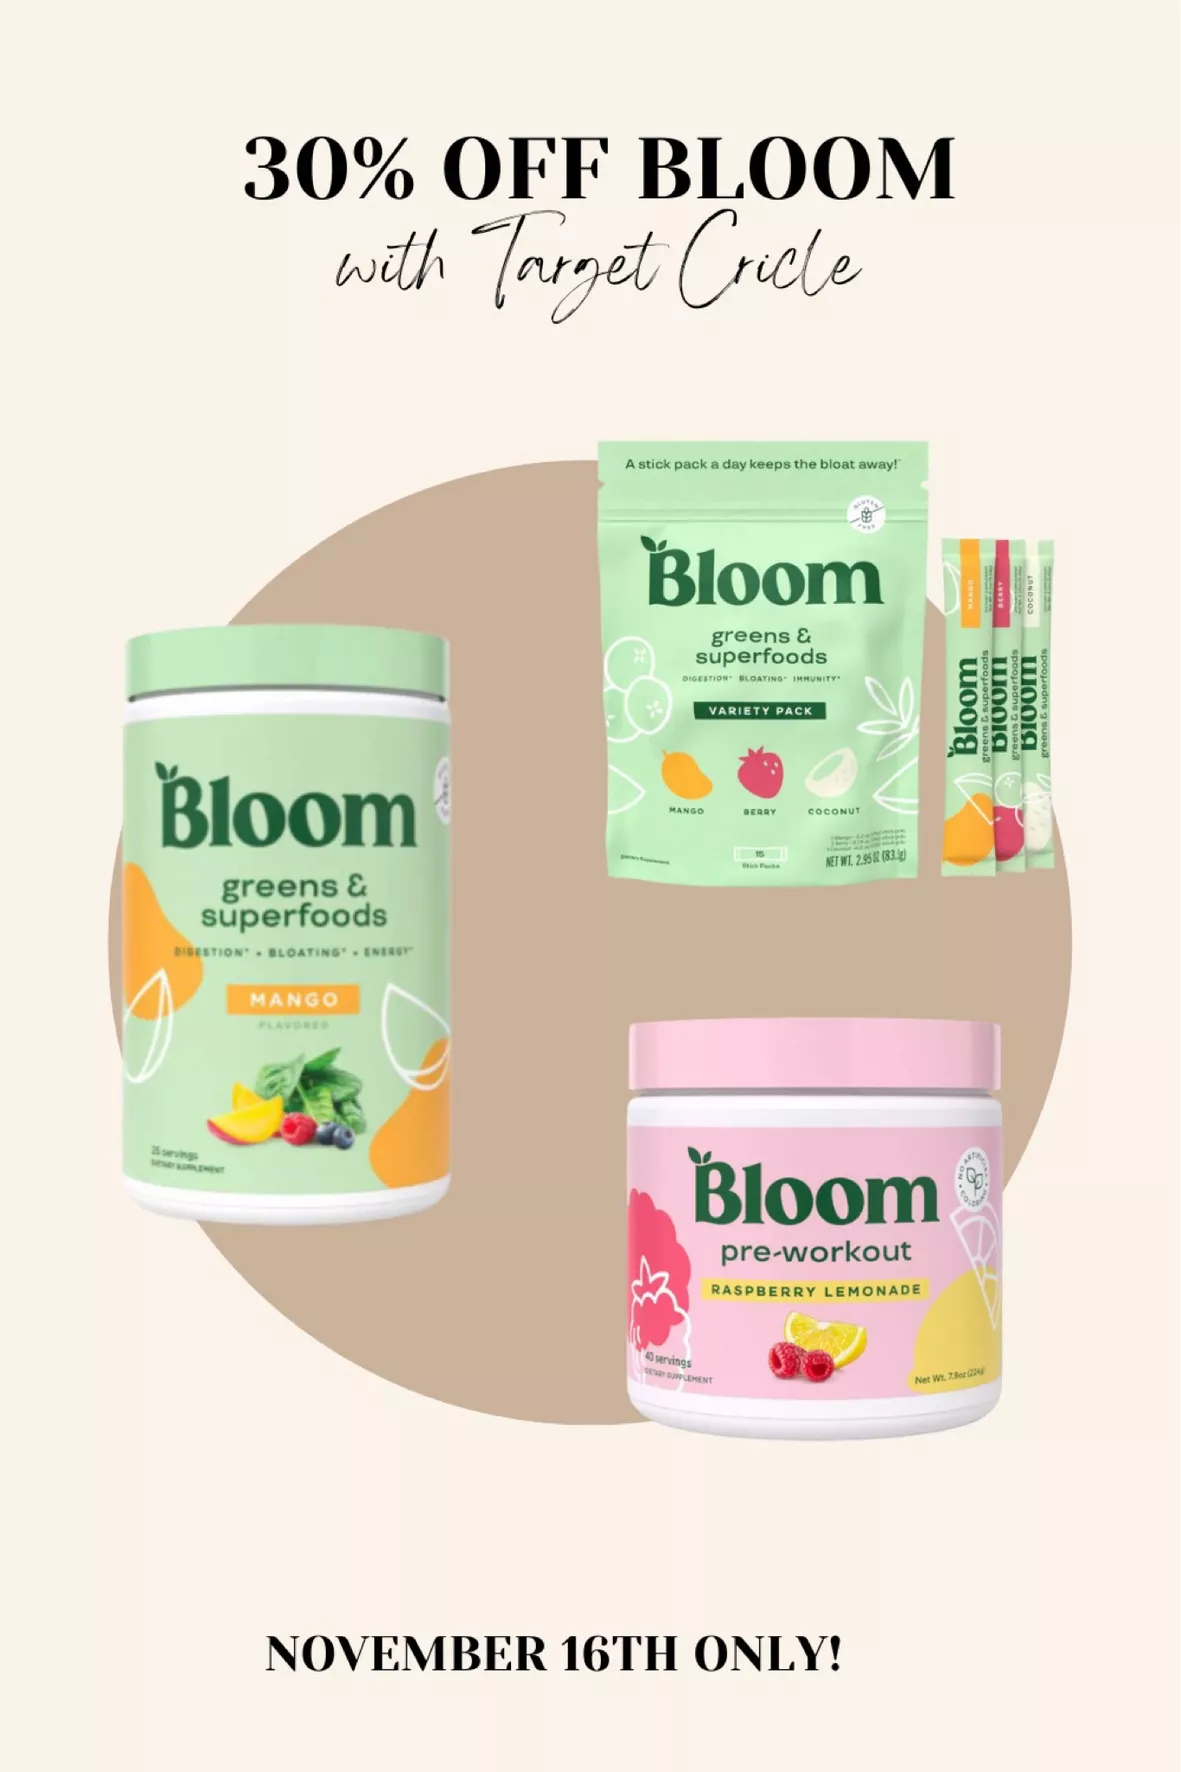 Bloom Nutrition makes snacking category debut with limited-edition